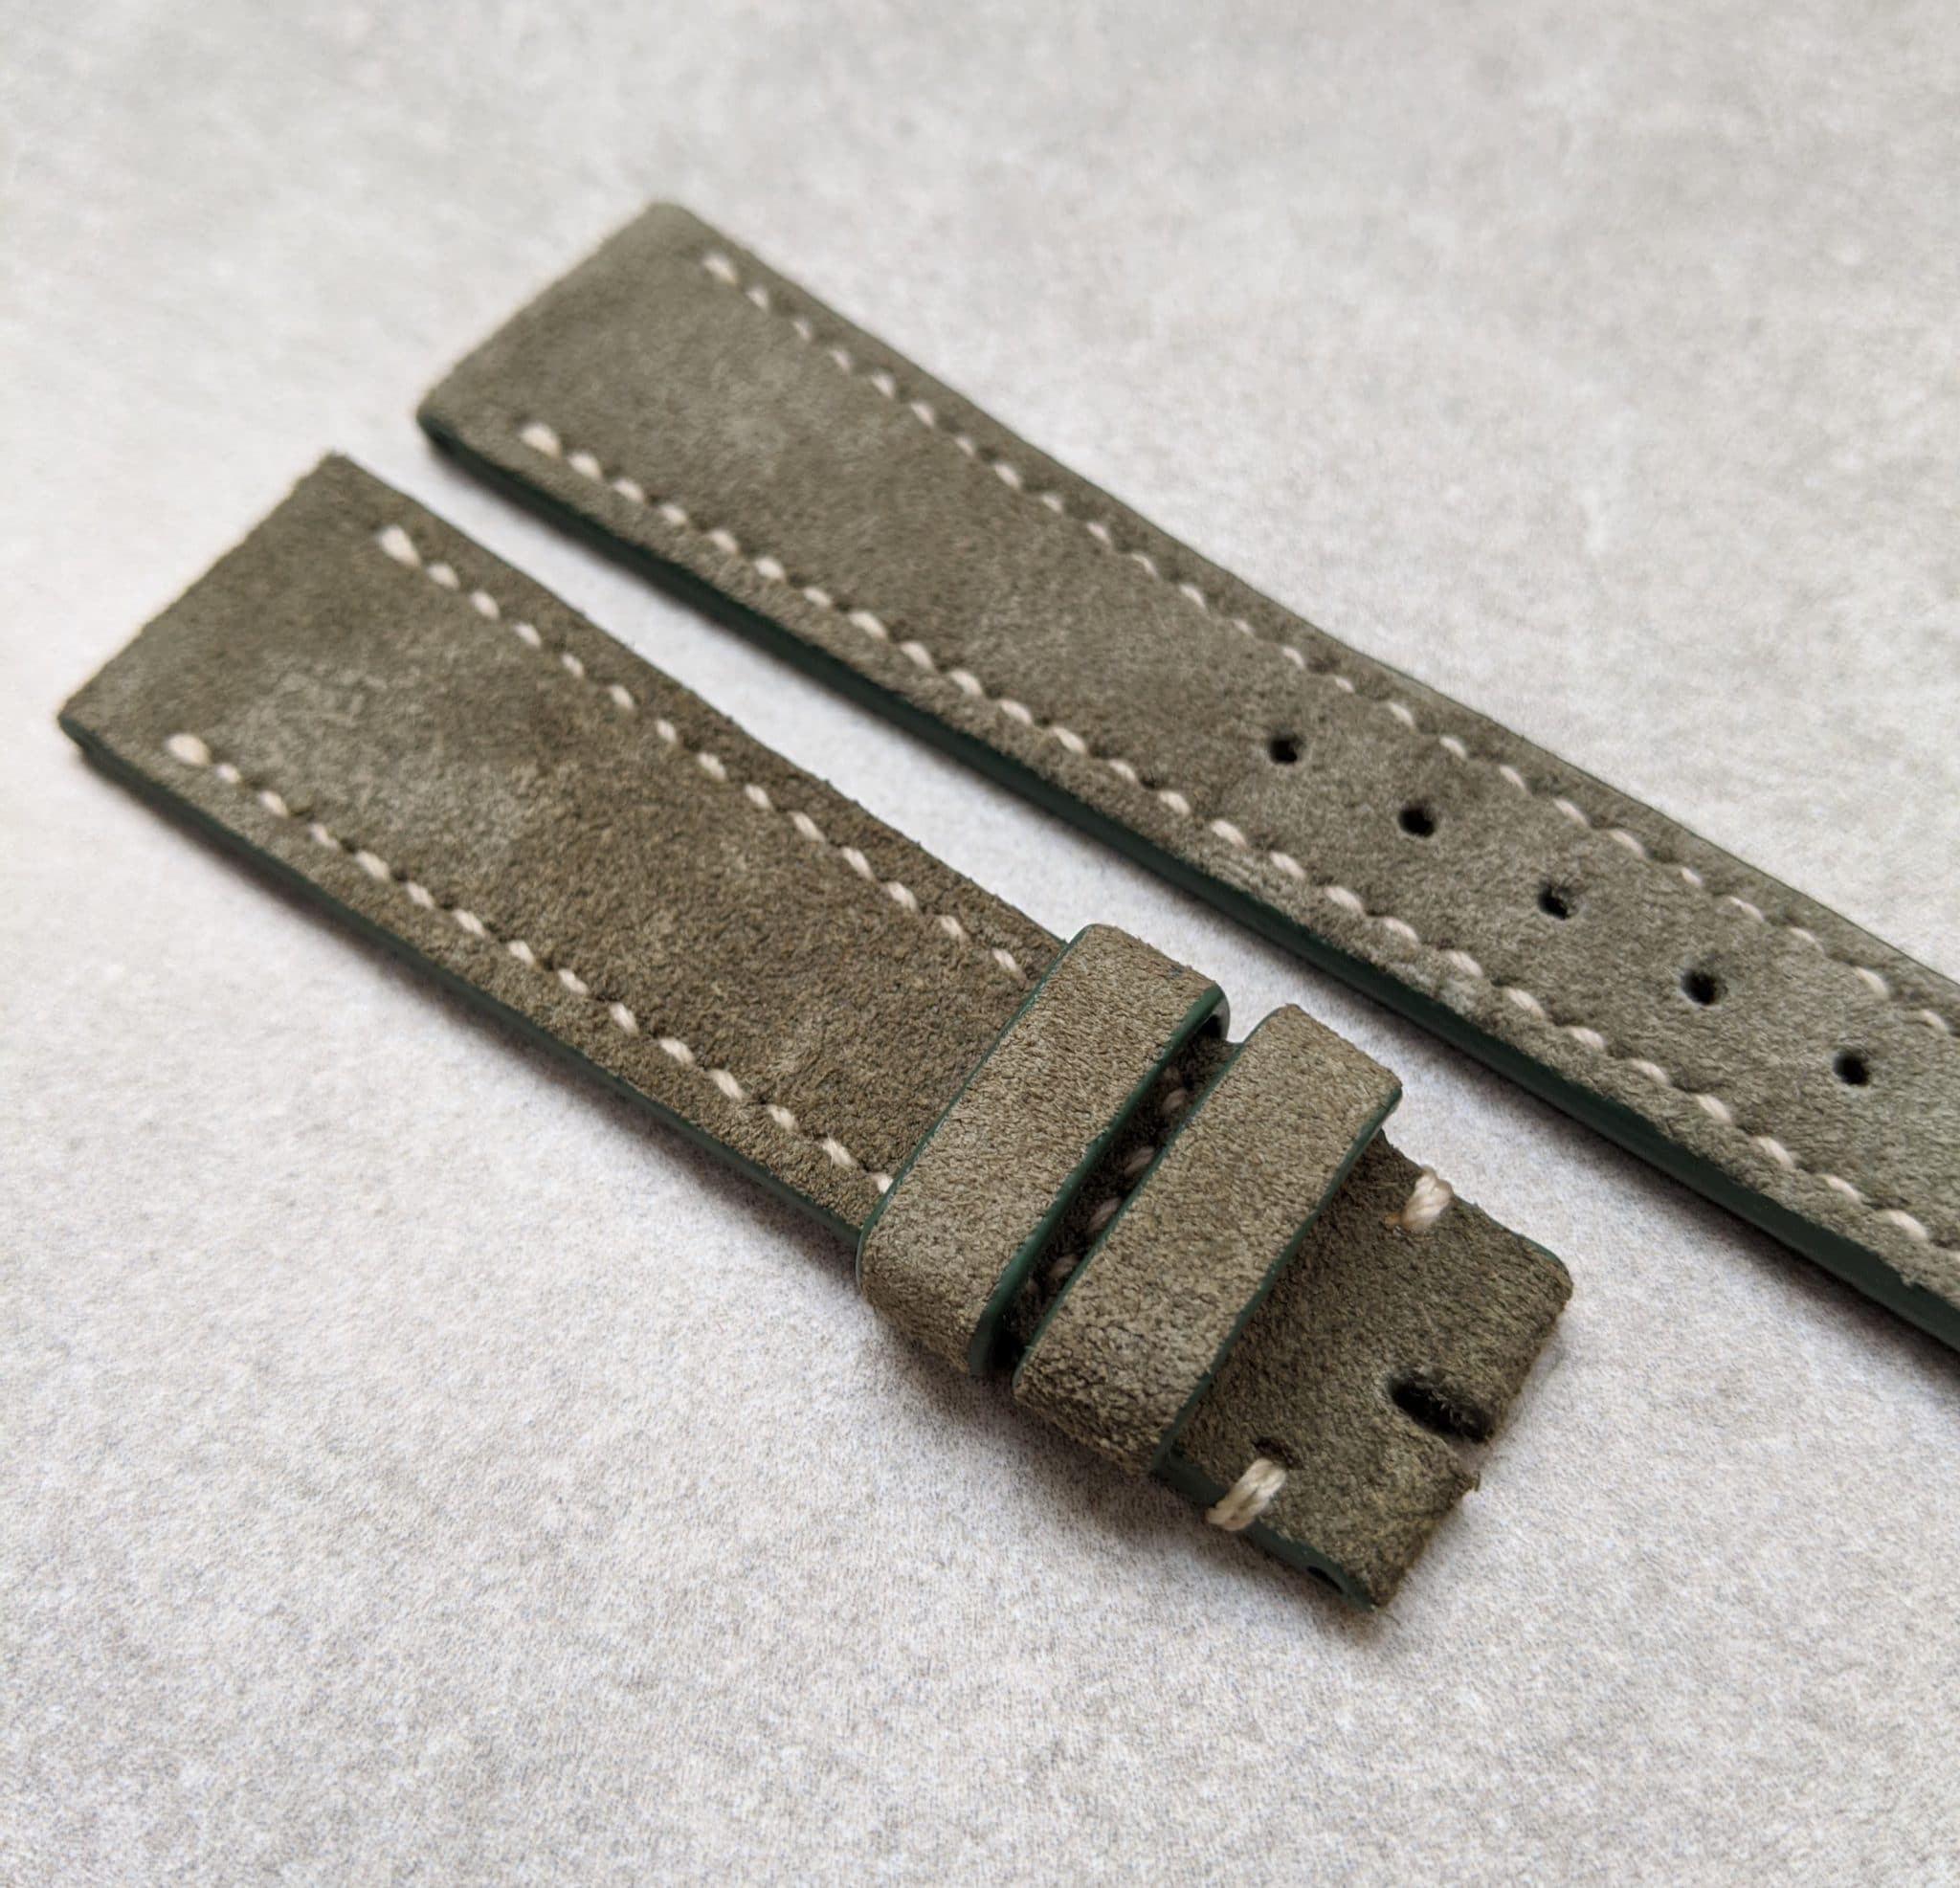 Stitched Suede Strap - Olive Green - The Strap Tailor